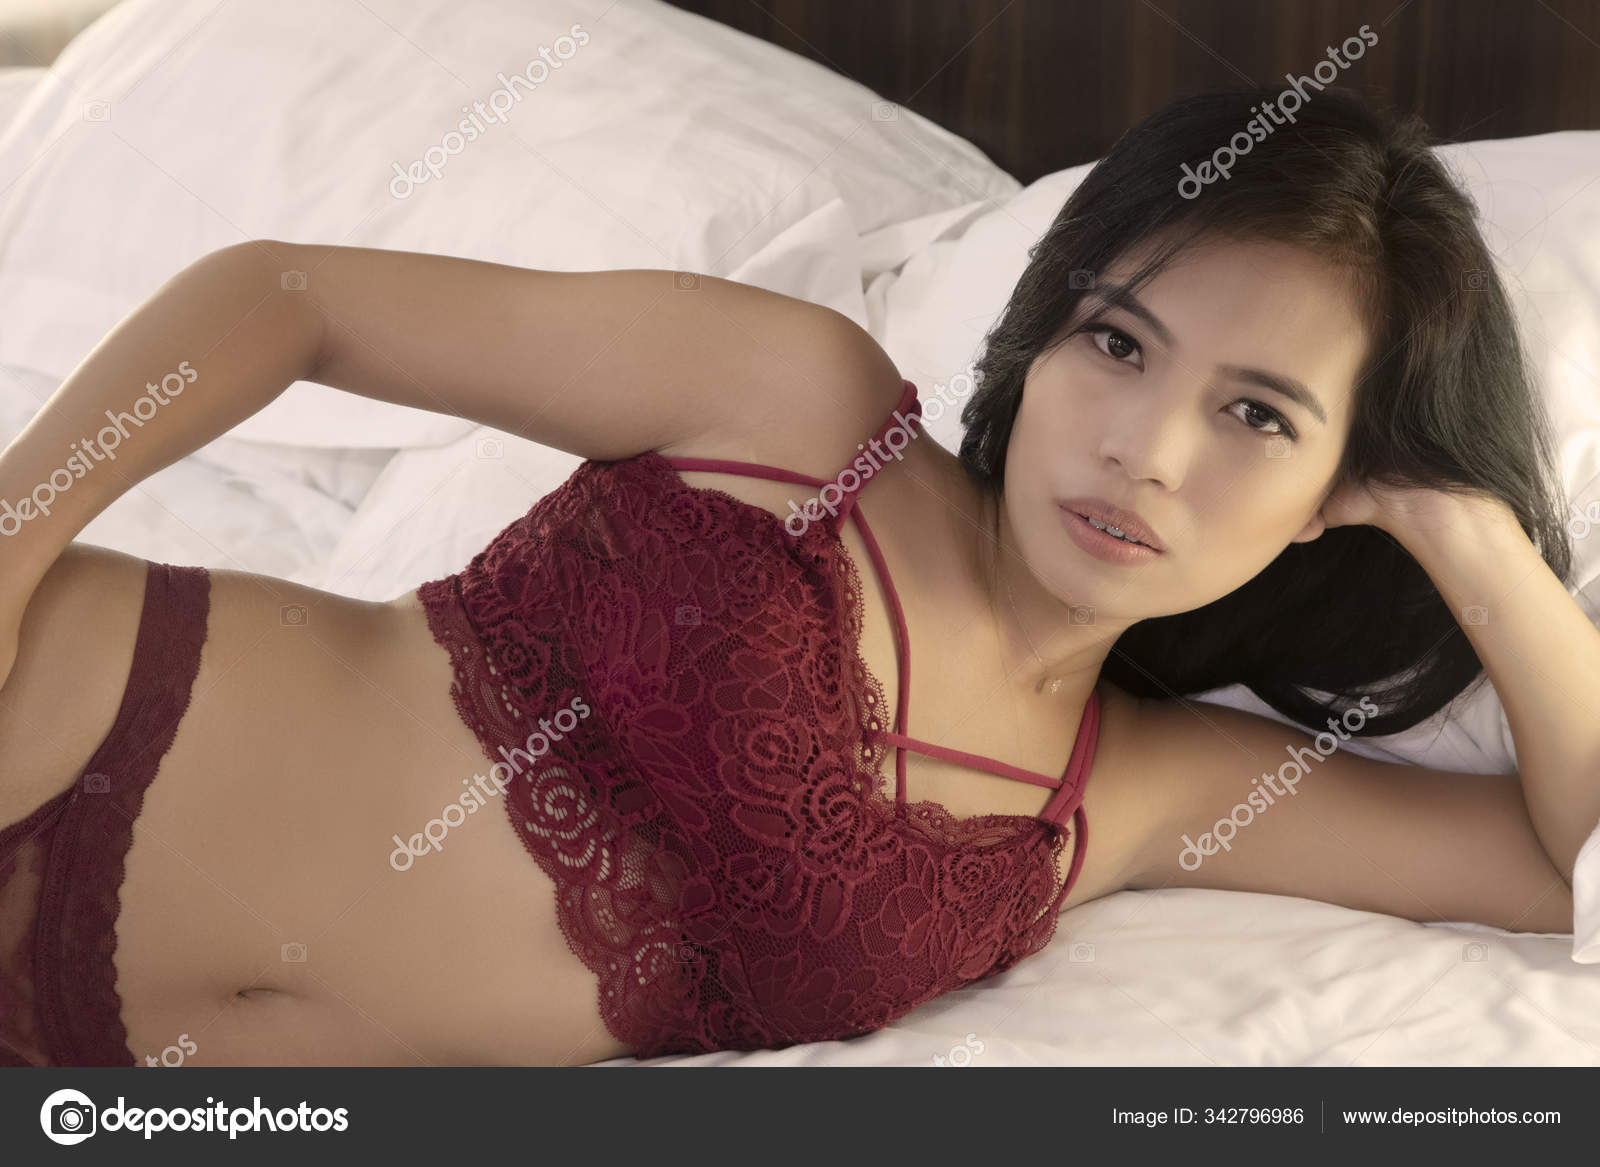 Beautiful Asian woman posing nude on white sheets Stock Photo by ©dndavis 342796986 image picture